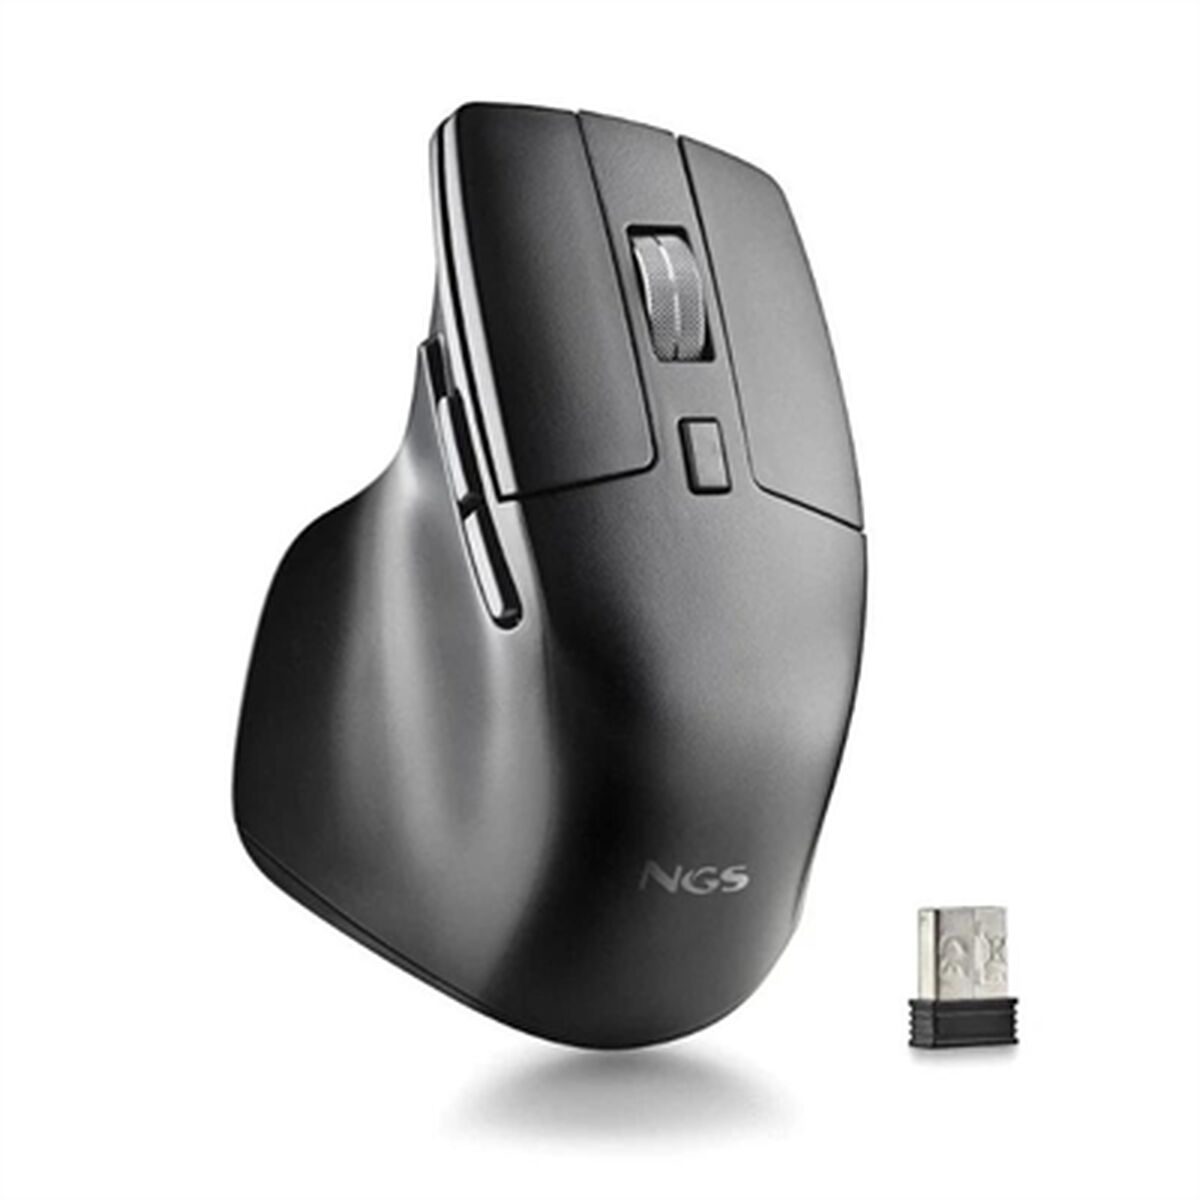 Wireless Mouse NGS HIT-RB Black, NGS, Computing, Accessories, wireless-mouse-ngs-hit-rb-black, Brand_NGS, category-reference-2609, category-reference-2642, category-reference-2656, category-reference-t-19685, category-reference-t-19908, category-reference-t-21353, category-reference-t-25626, computers / peripherals, Condition_NEW, office, Price_20 - 50, Teleworking, RiotNook